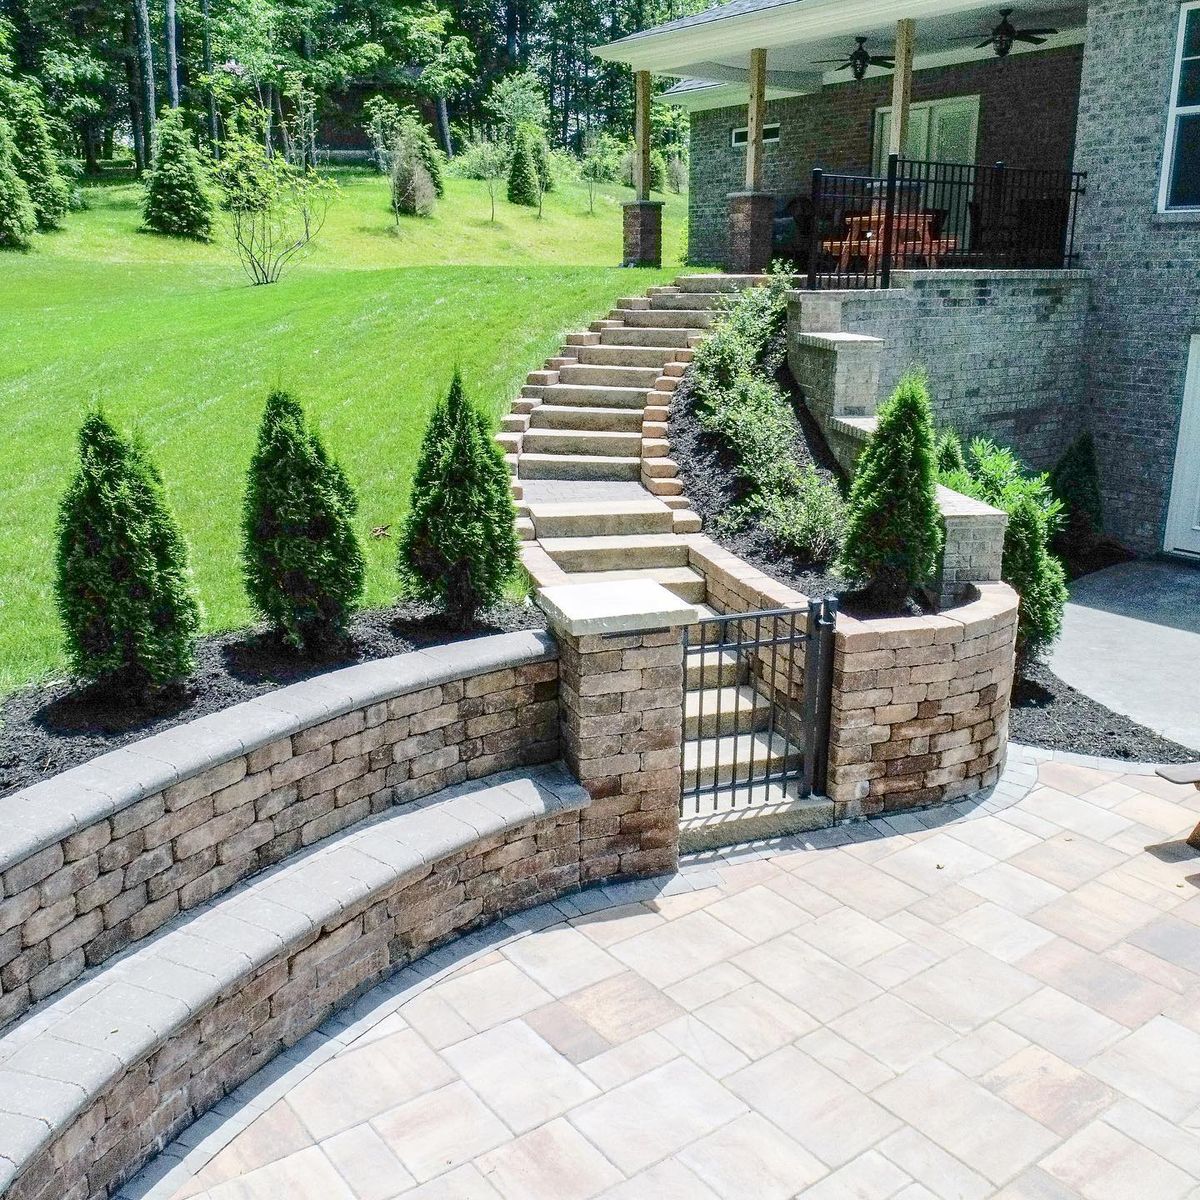 Retaining Wall Construction for Lamb's Lawn Service & Landscaping in Floyds Knobs, IN